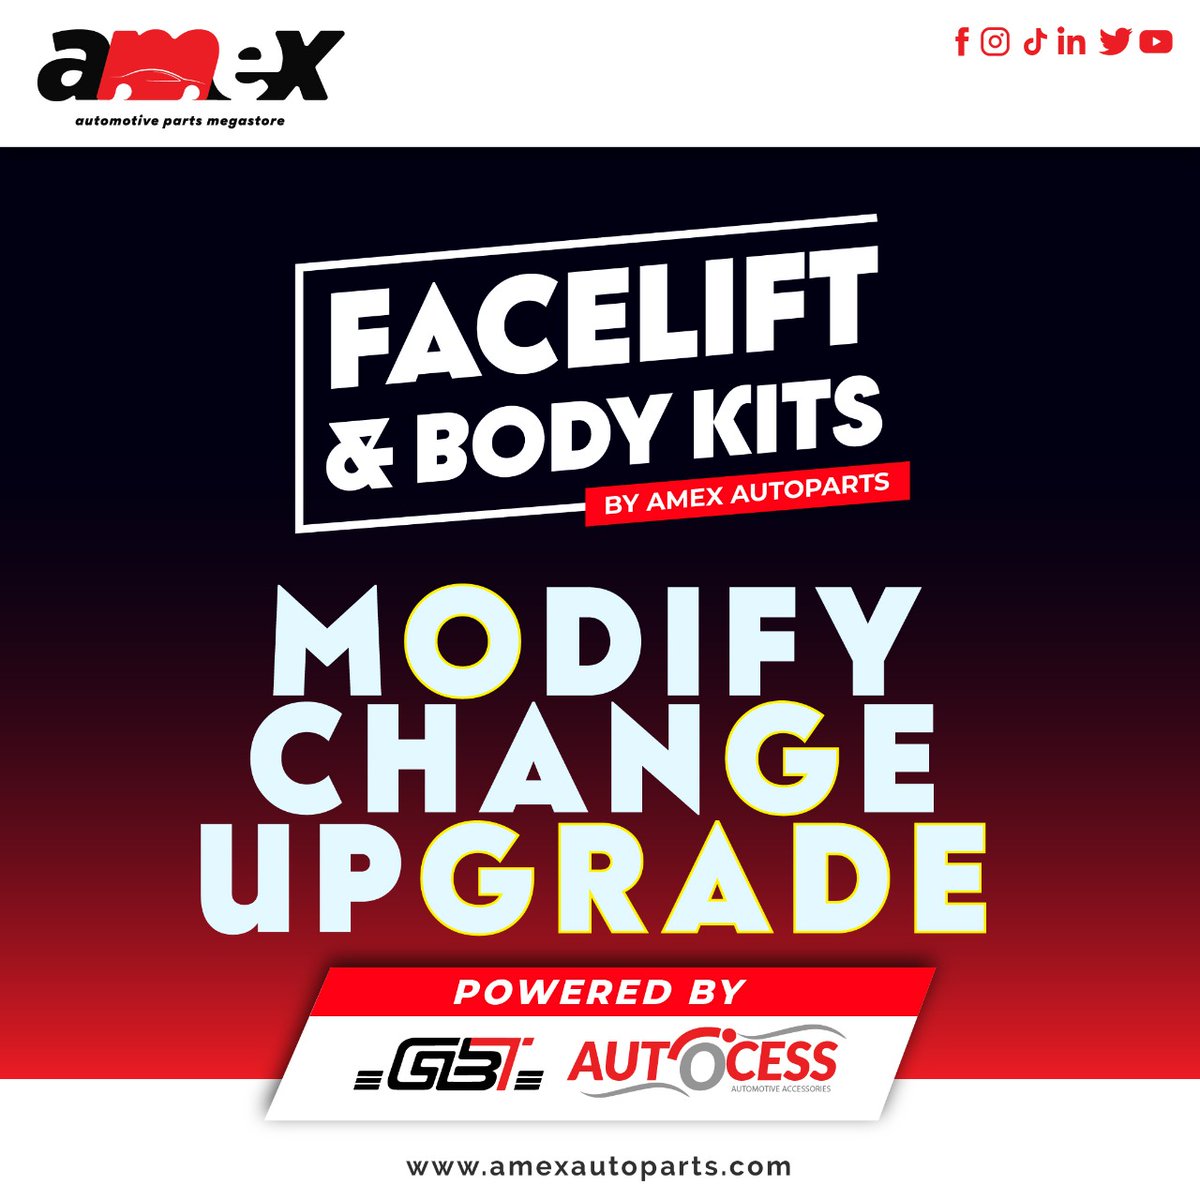 Explore our newly arrived auto parts and facelift collection, and get ready to modify your driving experience the way you want!

#amexautoparts#automotiveparts #vehicle #automotivemegastore #Availableinstock #faceliftkits #bodypart #Lexus